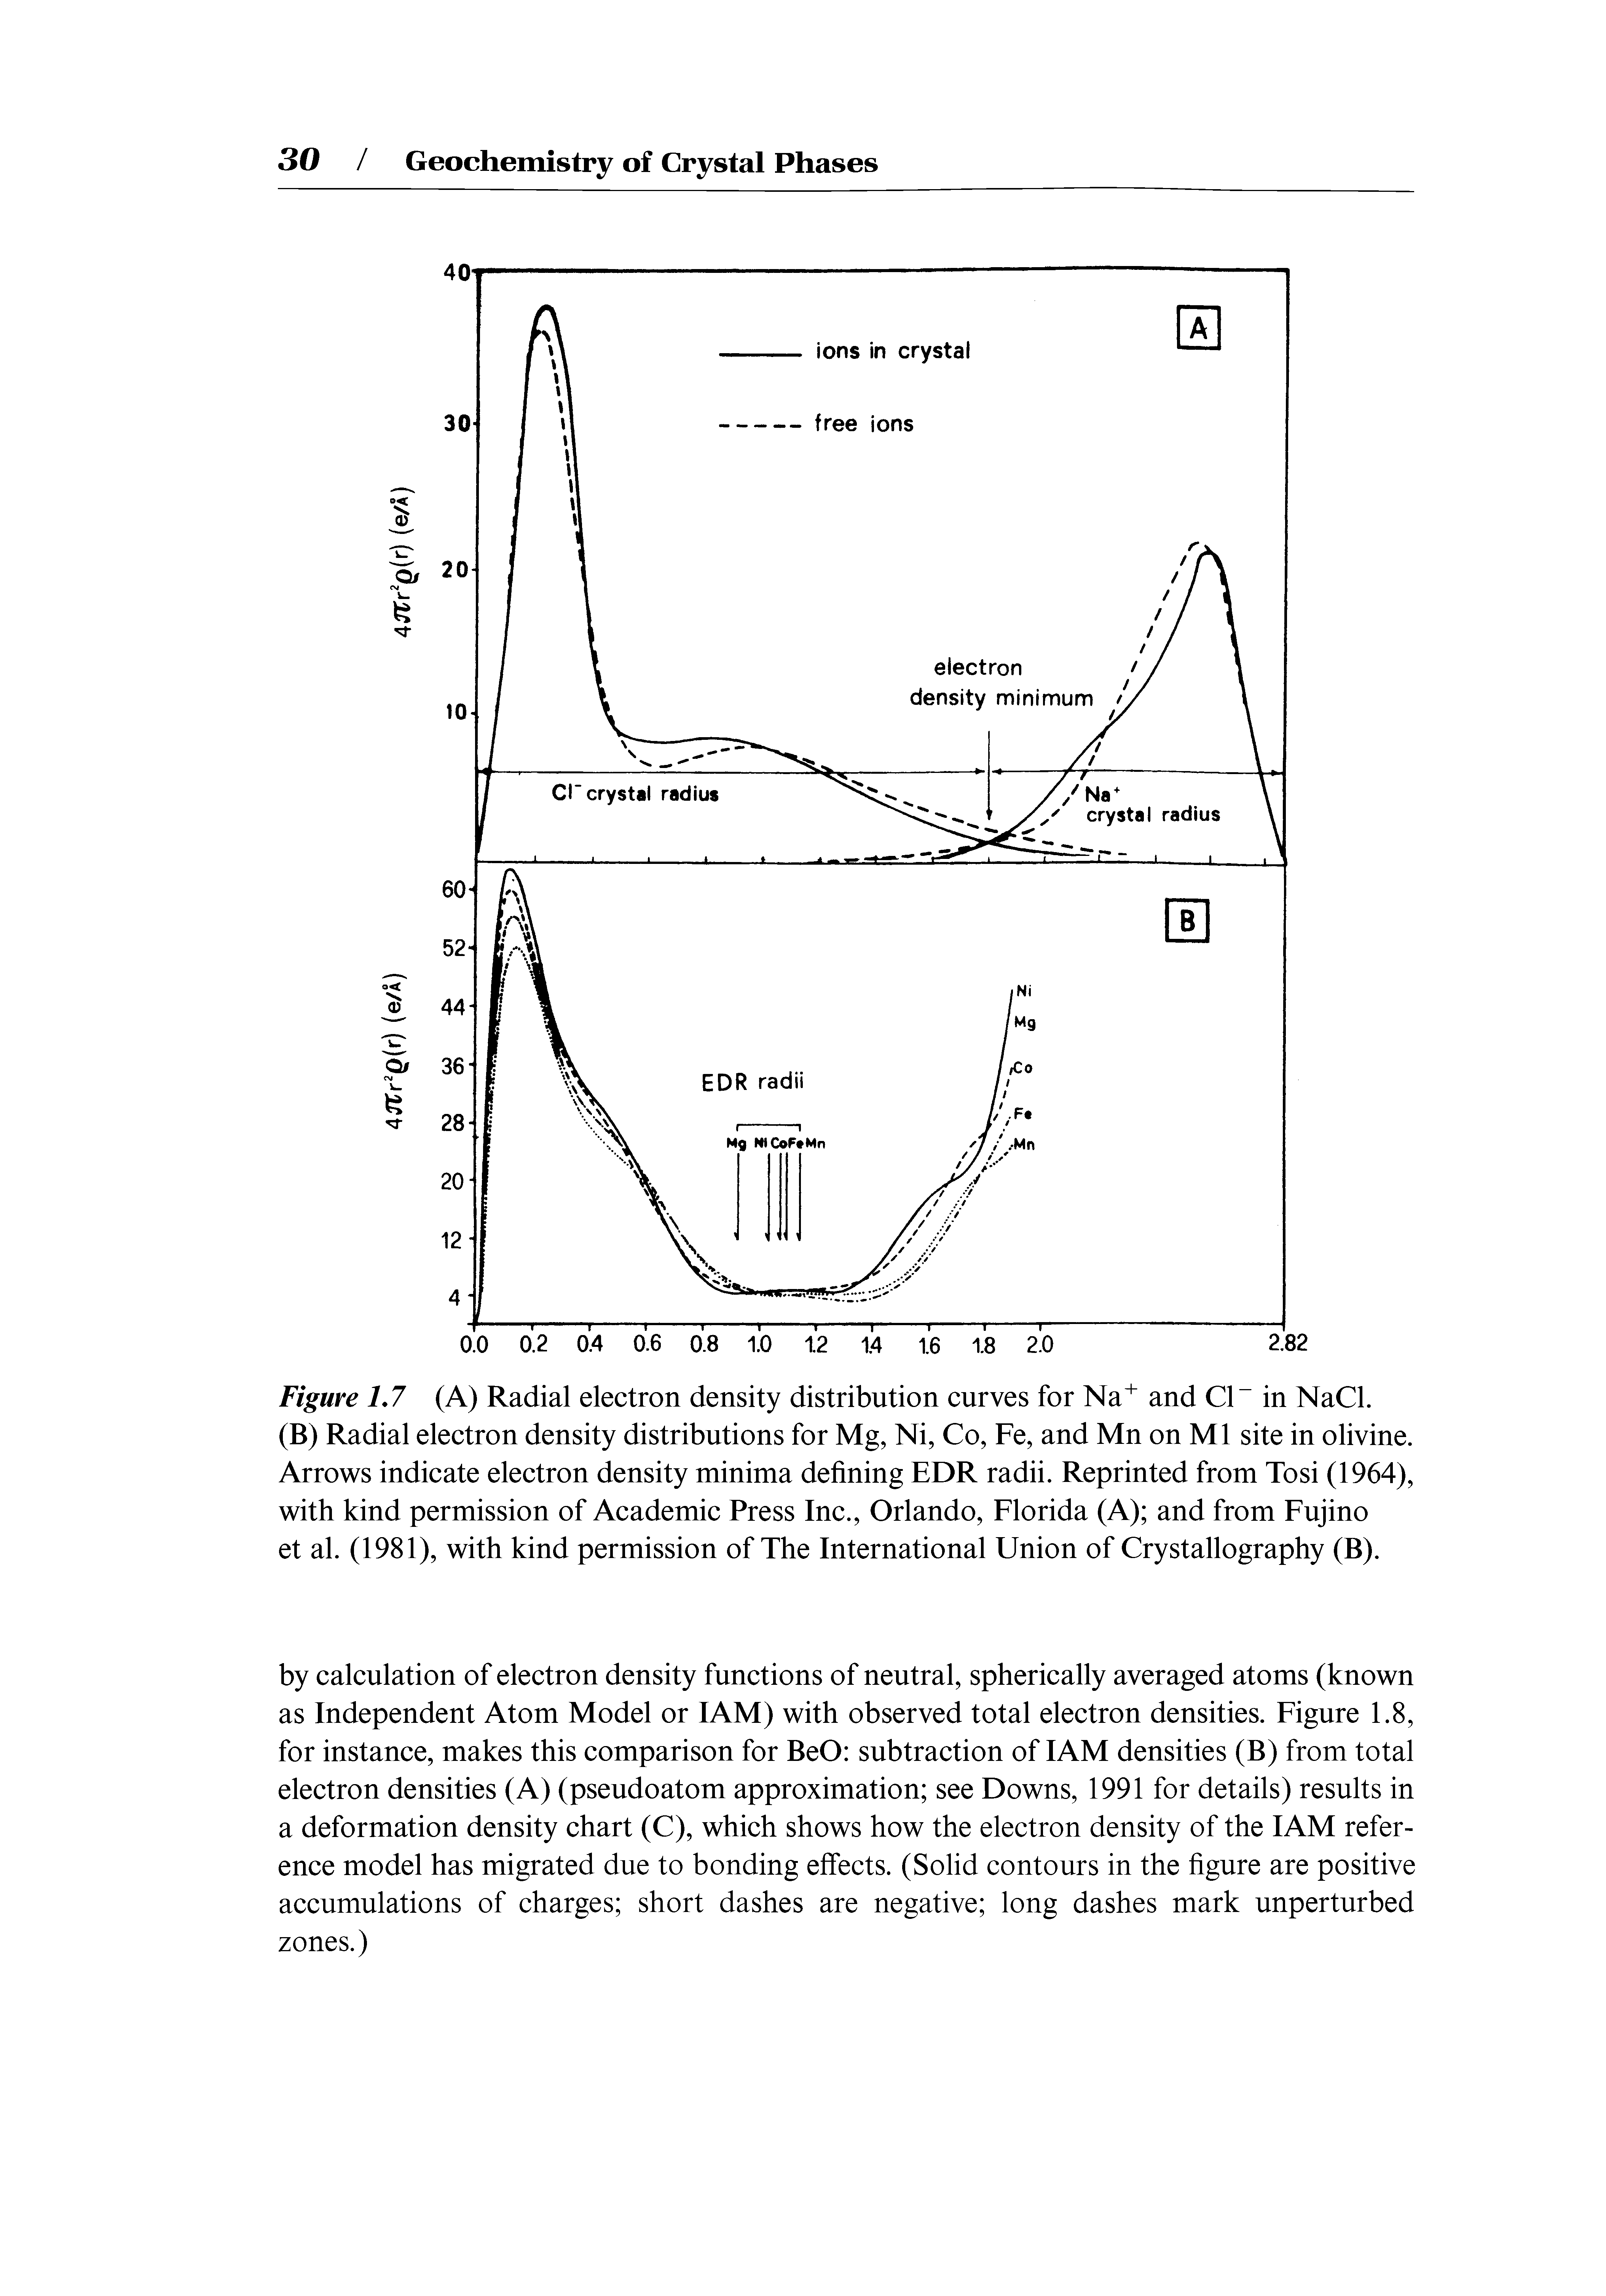 Figure IJ (A) Radial electron density distribution curves for Na and Cl in NaCl.